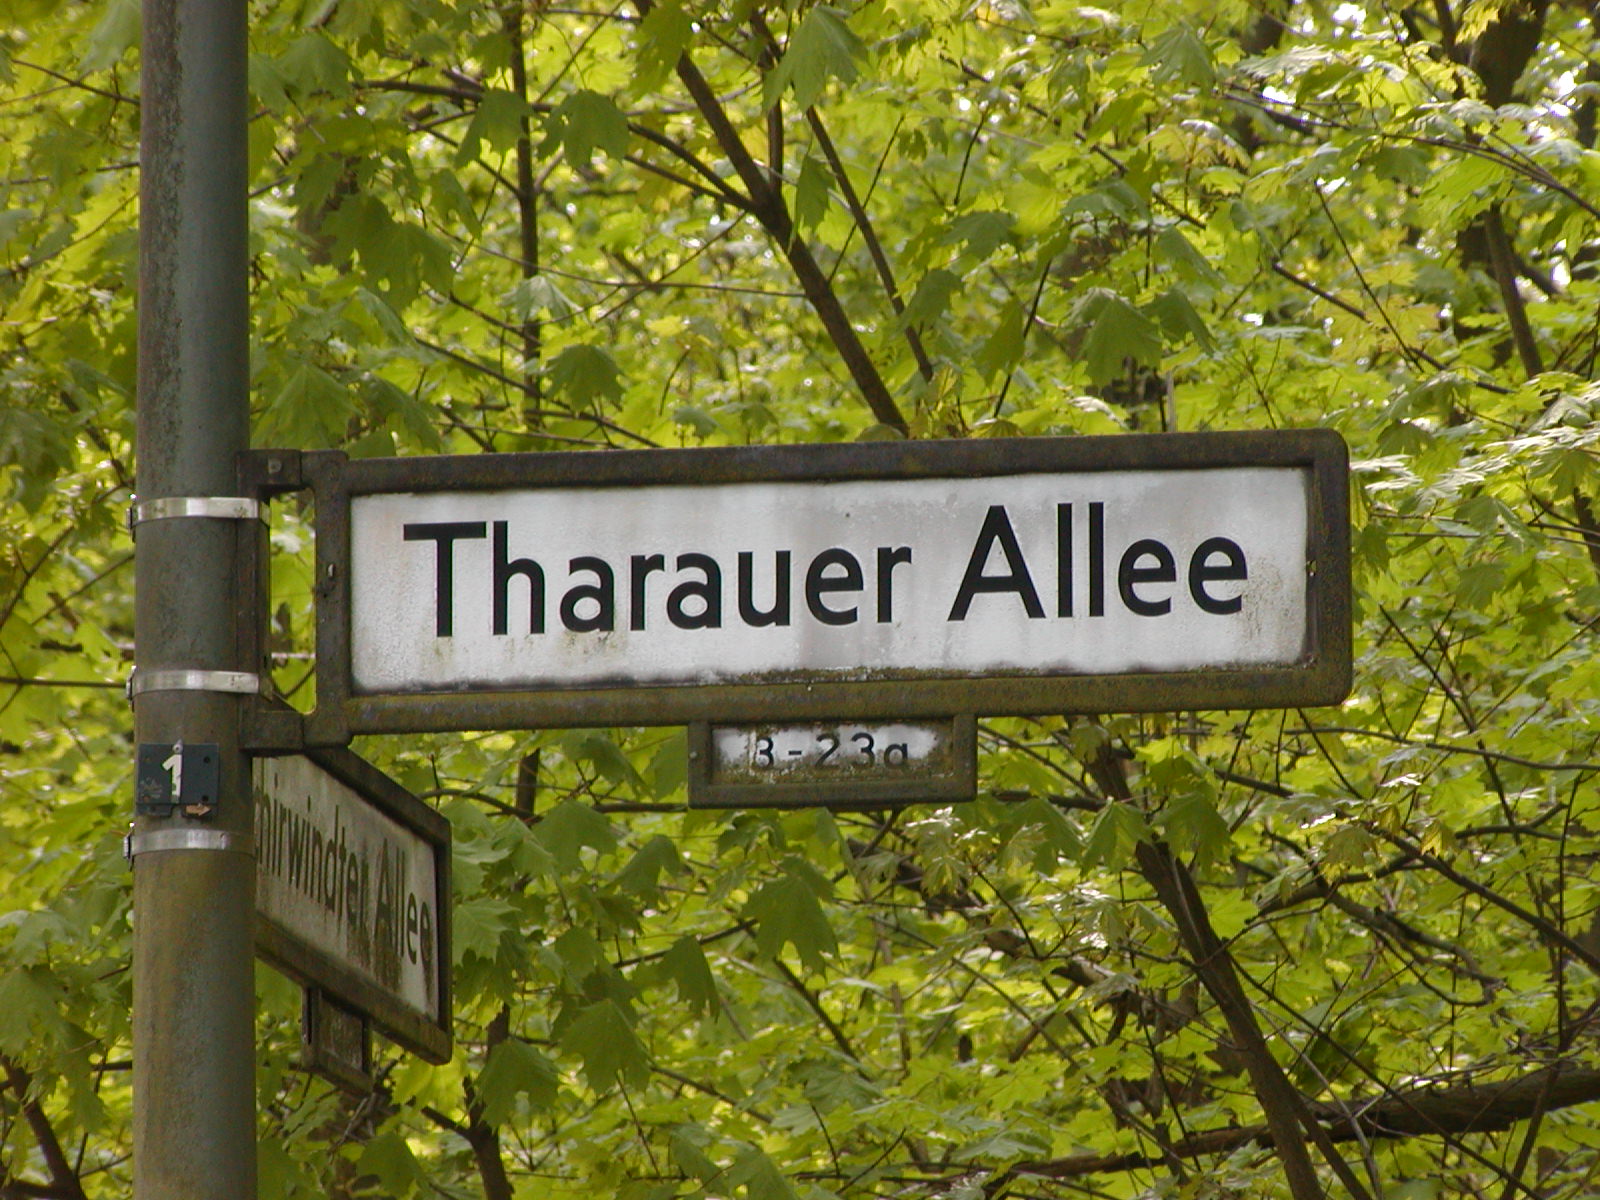 Street sign, we lived there